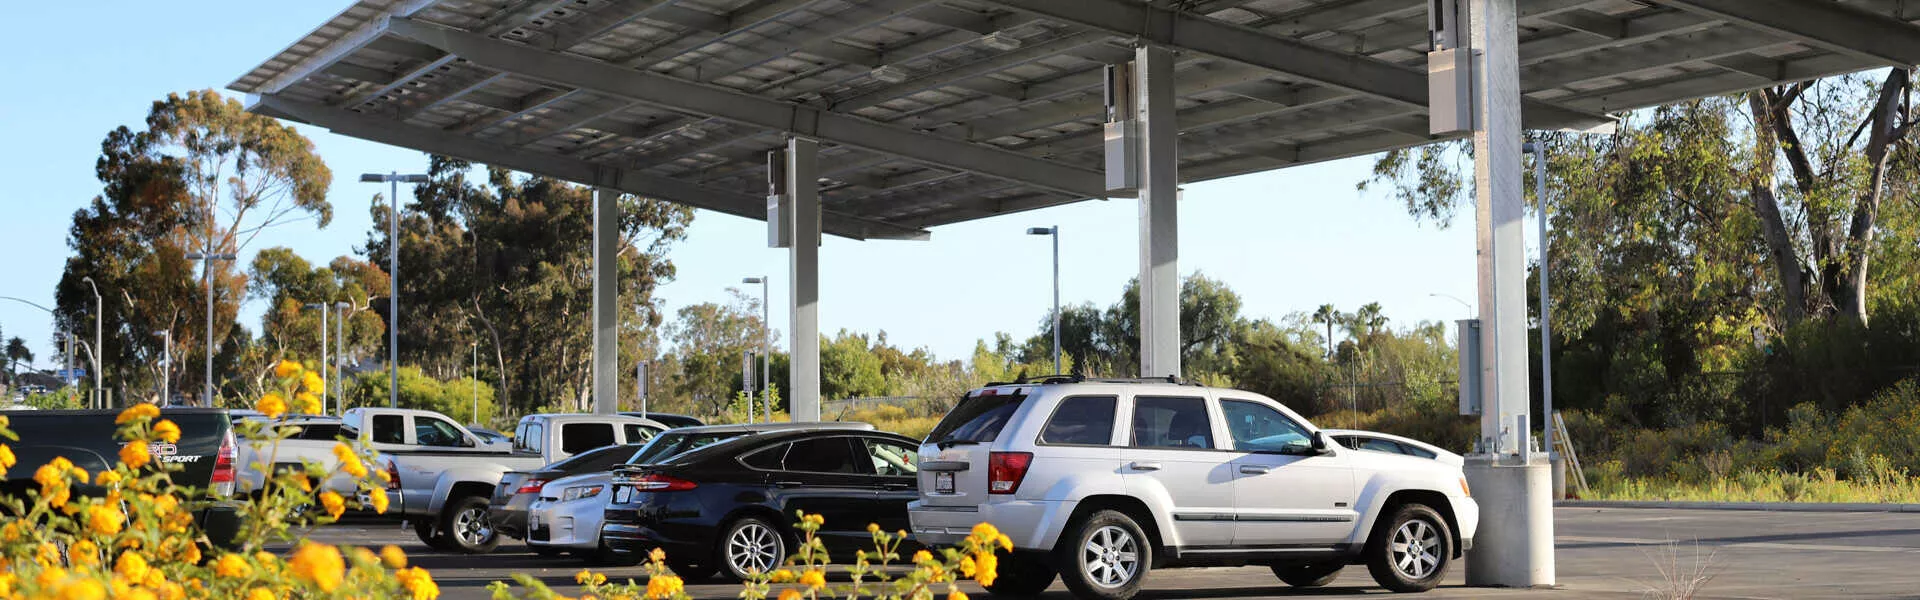 cars parked in solar carport